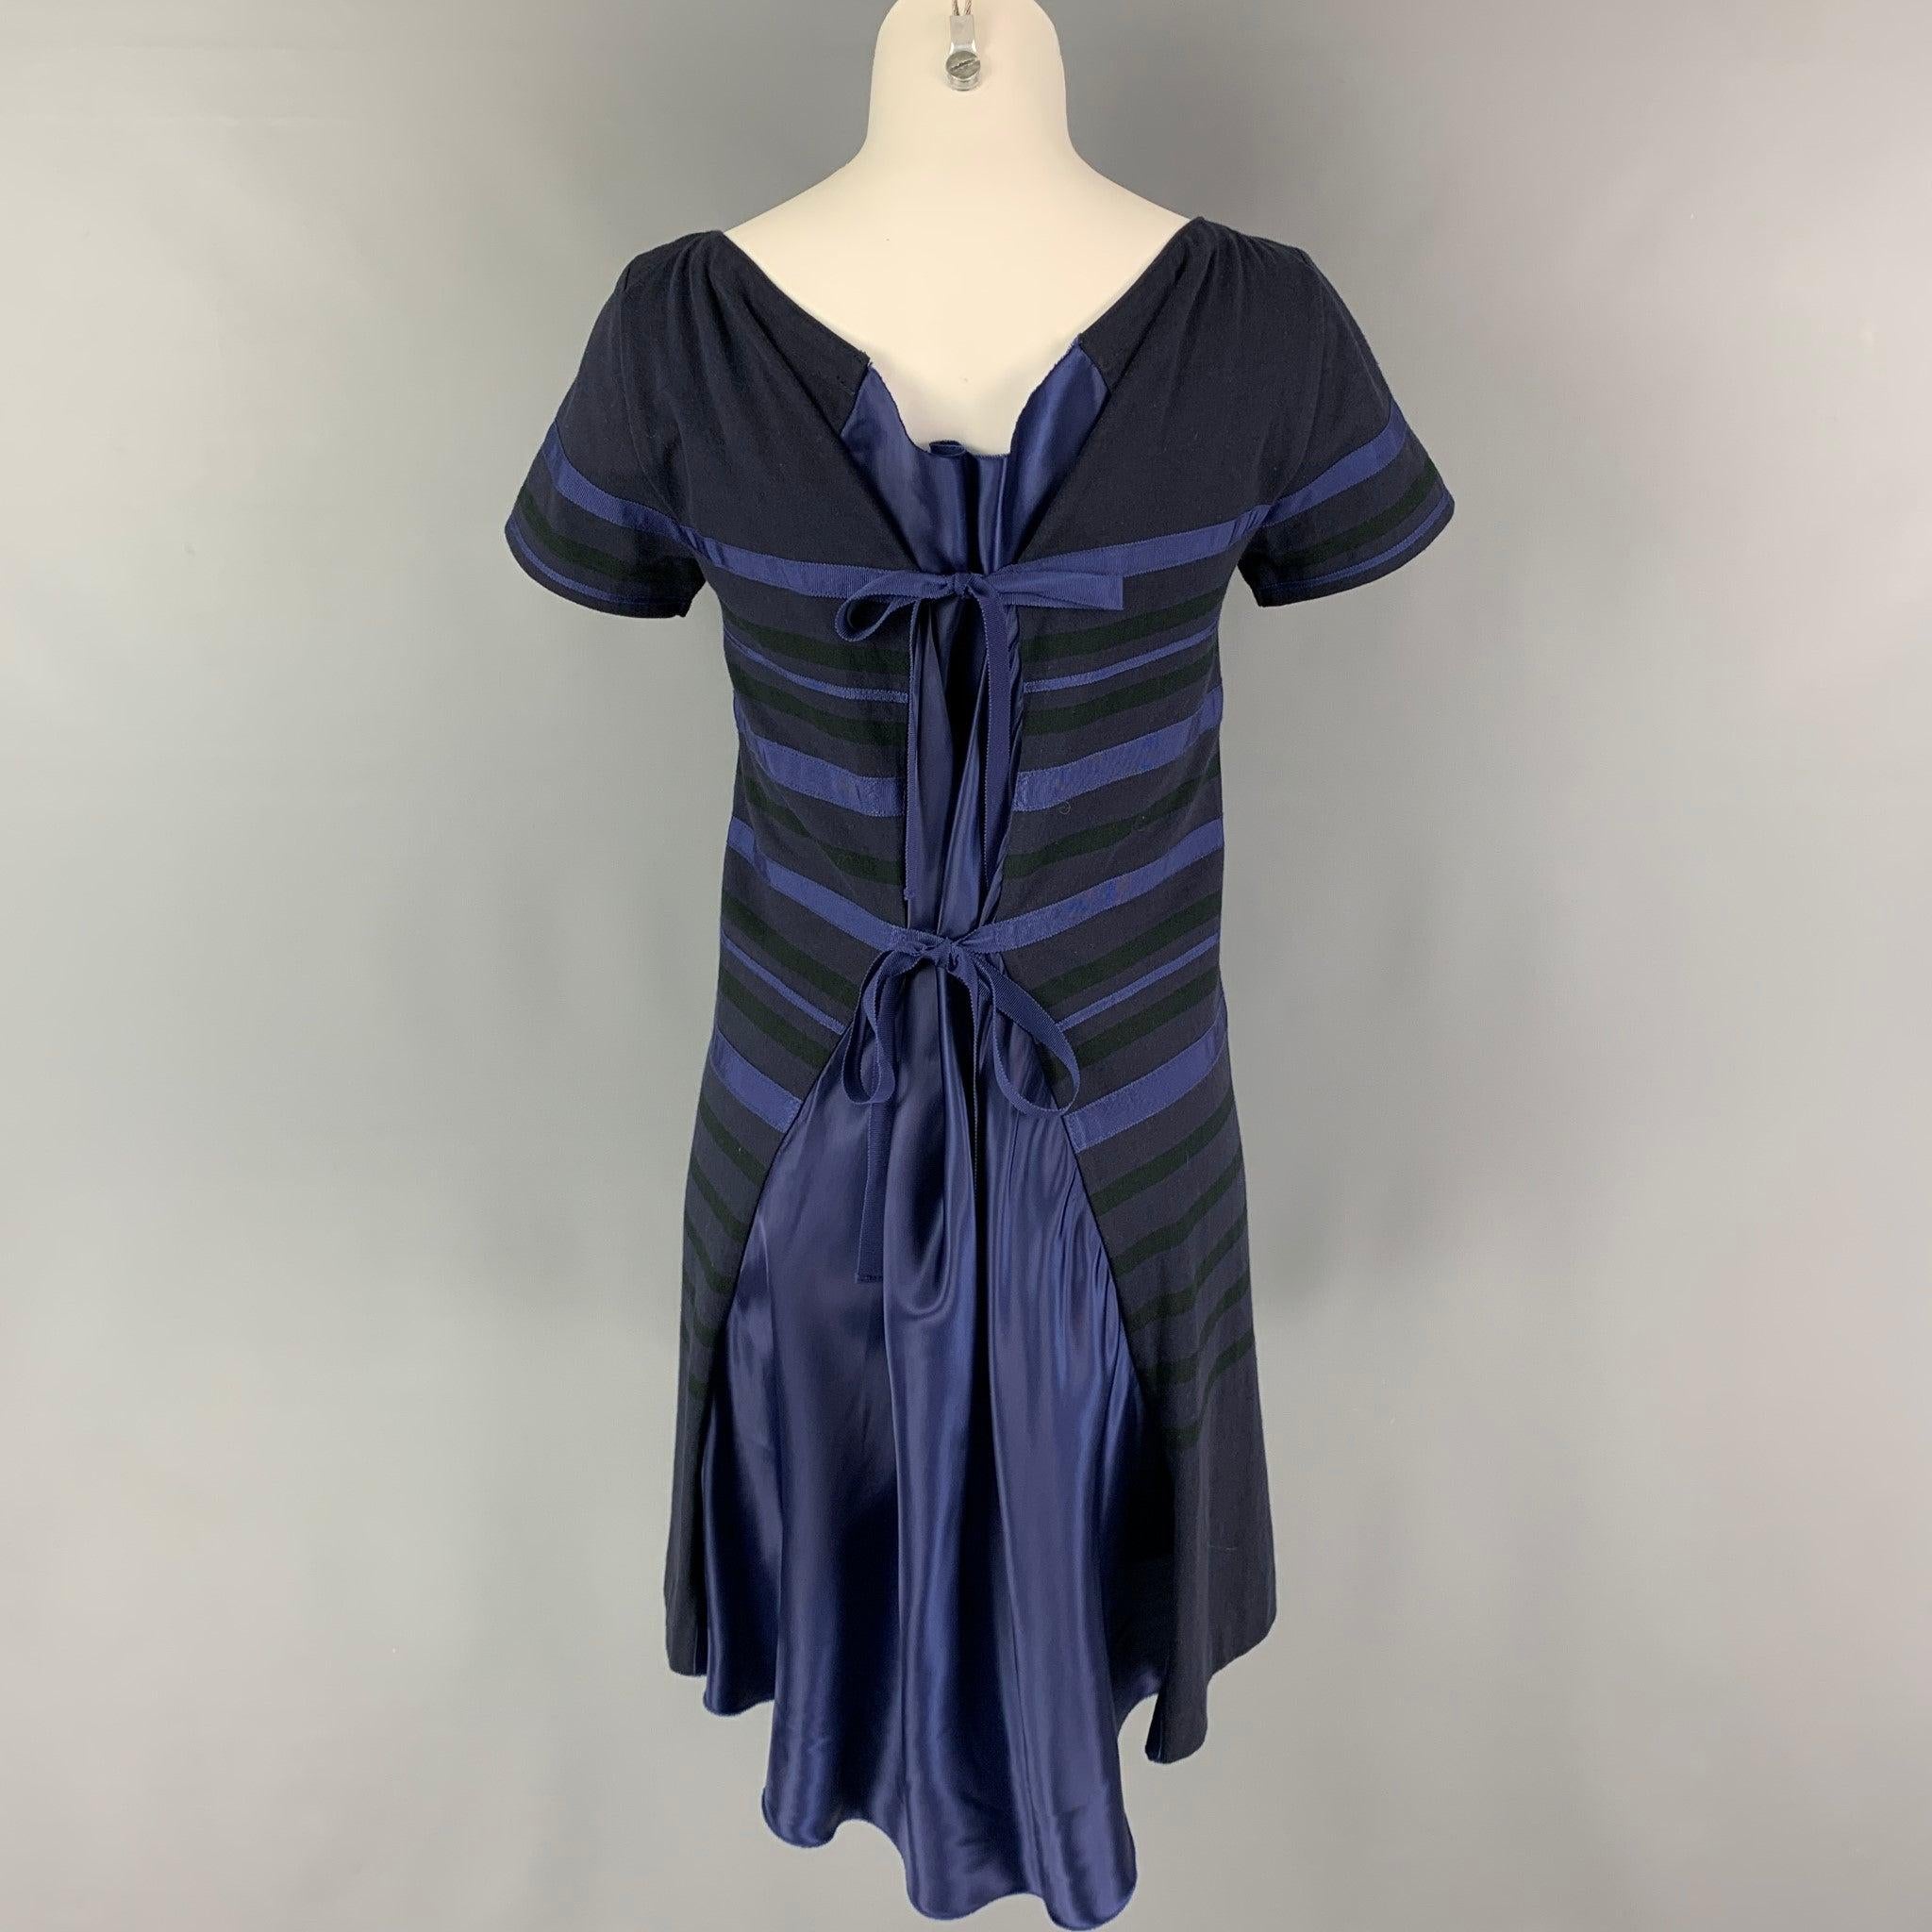 SACAI LUCK dress comes in a navy jersey mixed materials featuring a 
shift style, short sleeves, back satin panel, and back ribbon closure design.
Very Good
Pre-Owned Condition.
Fabric tag removed.  

Marked:   Size tag removed.  

Measurements: 
